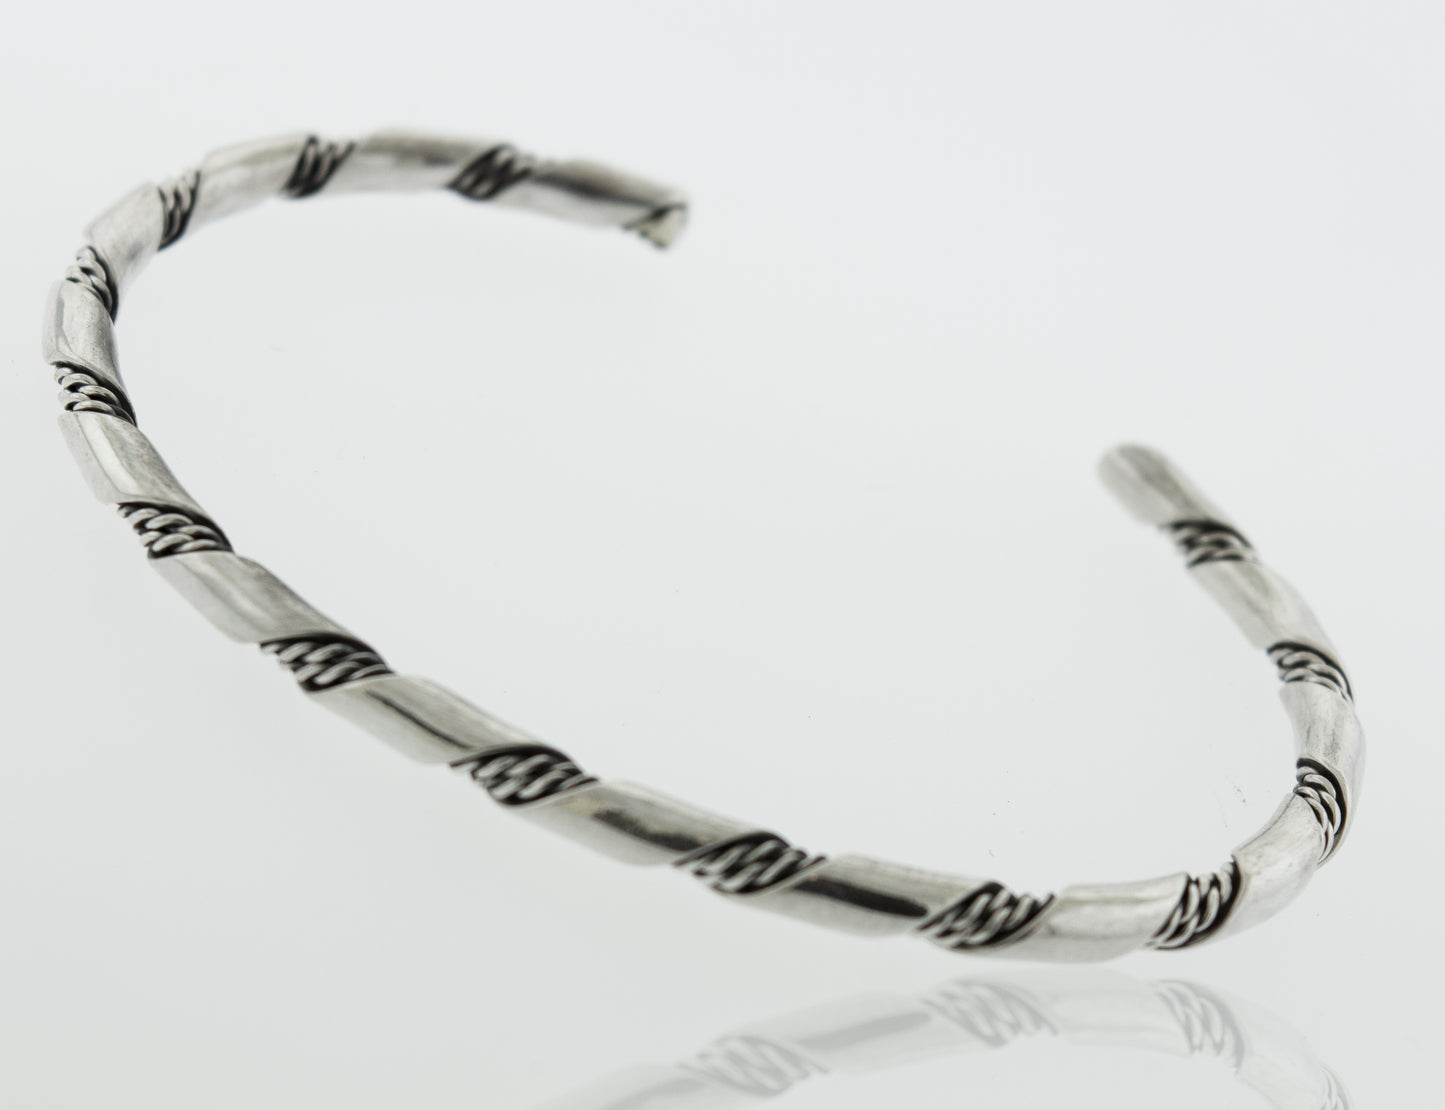 
                  
                    A Native American Handmade Thin Silver Twist Cuff from Super Silver, with a braided design, perfect for stacking or adding a stylish touch to any outing.
                  
                